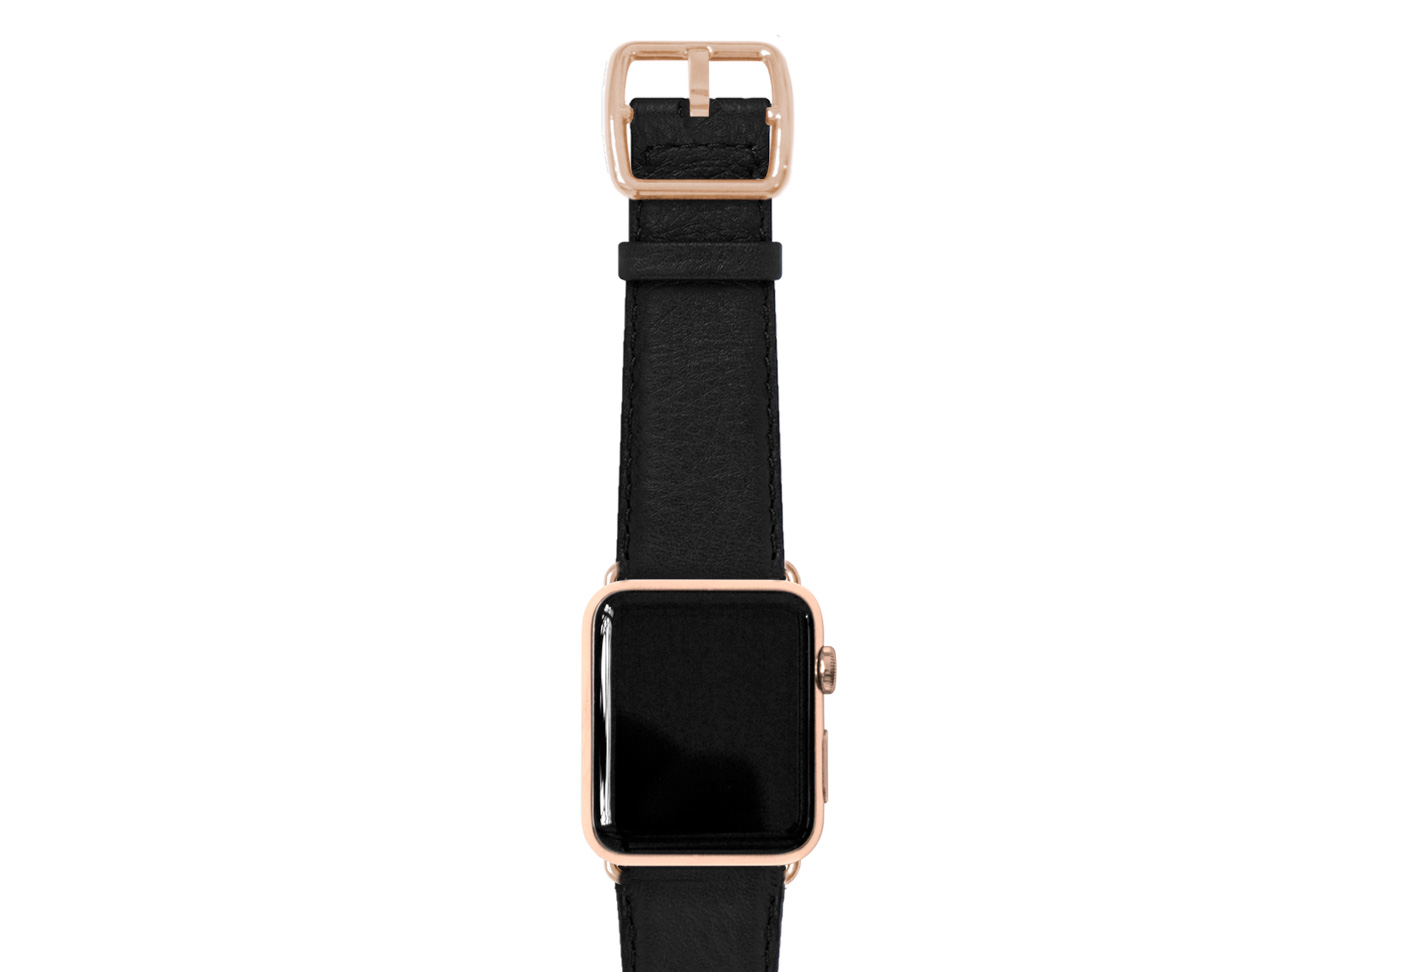 Ink nappa leather Apple watch band handmade in Italy | Meridio